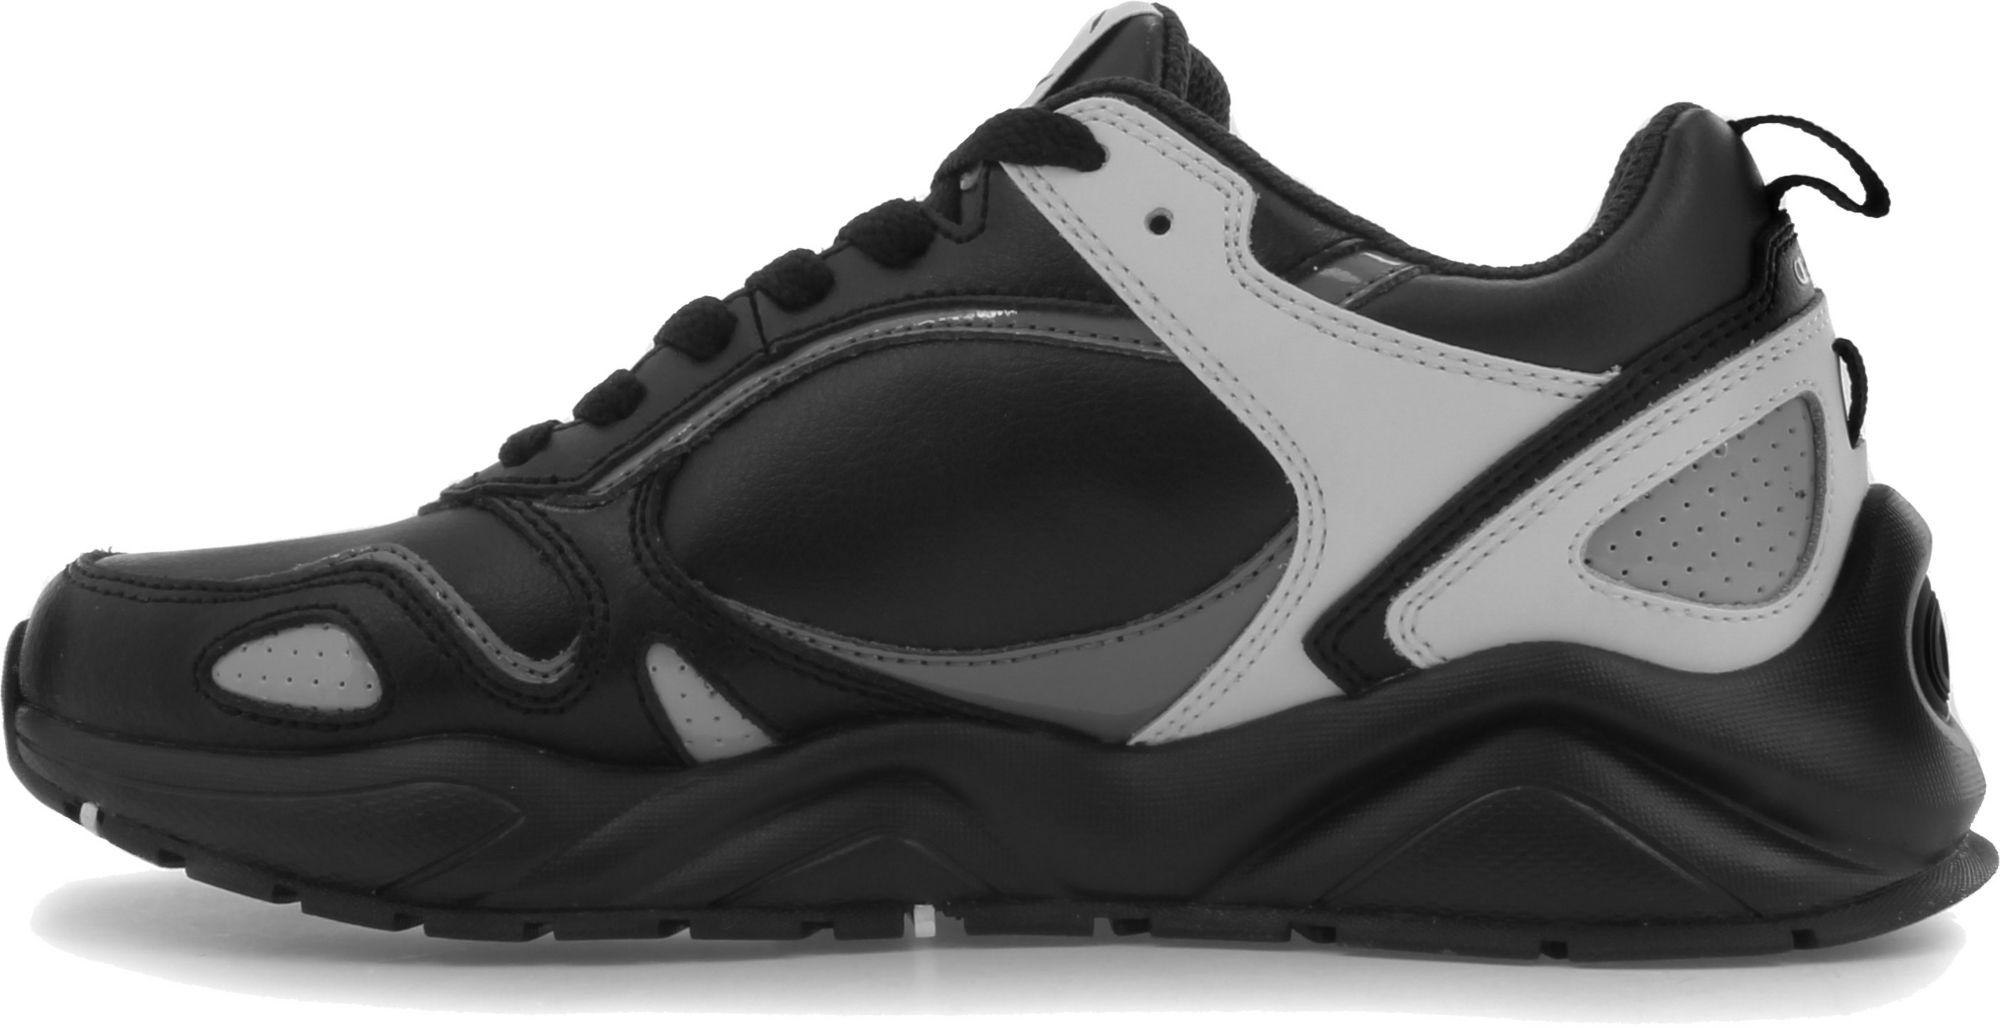 Champion Rubber Nxt Shoes in Black/Purple/White (Black) - Lyst